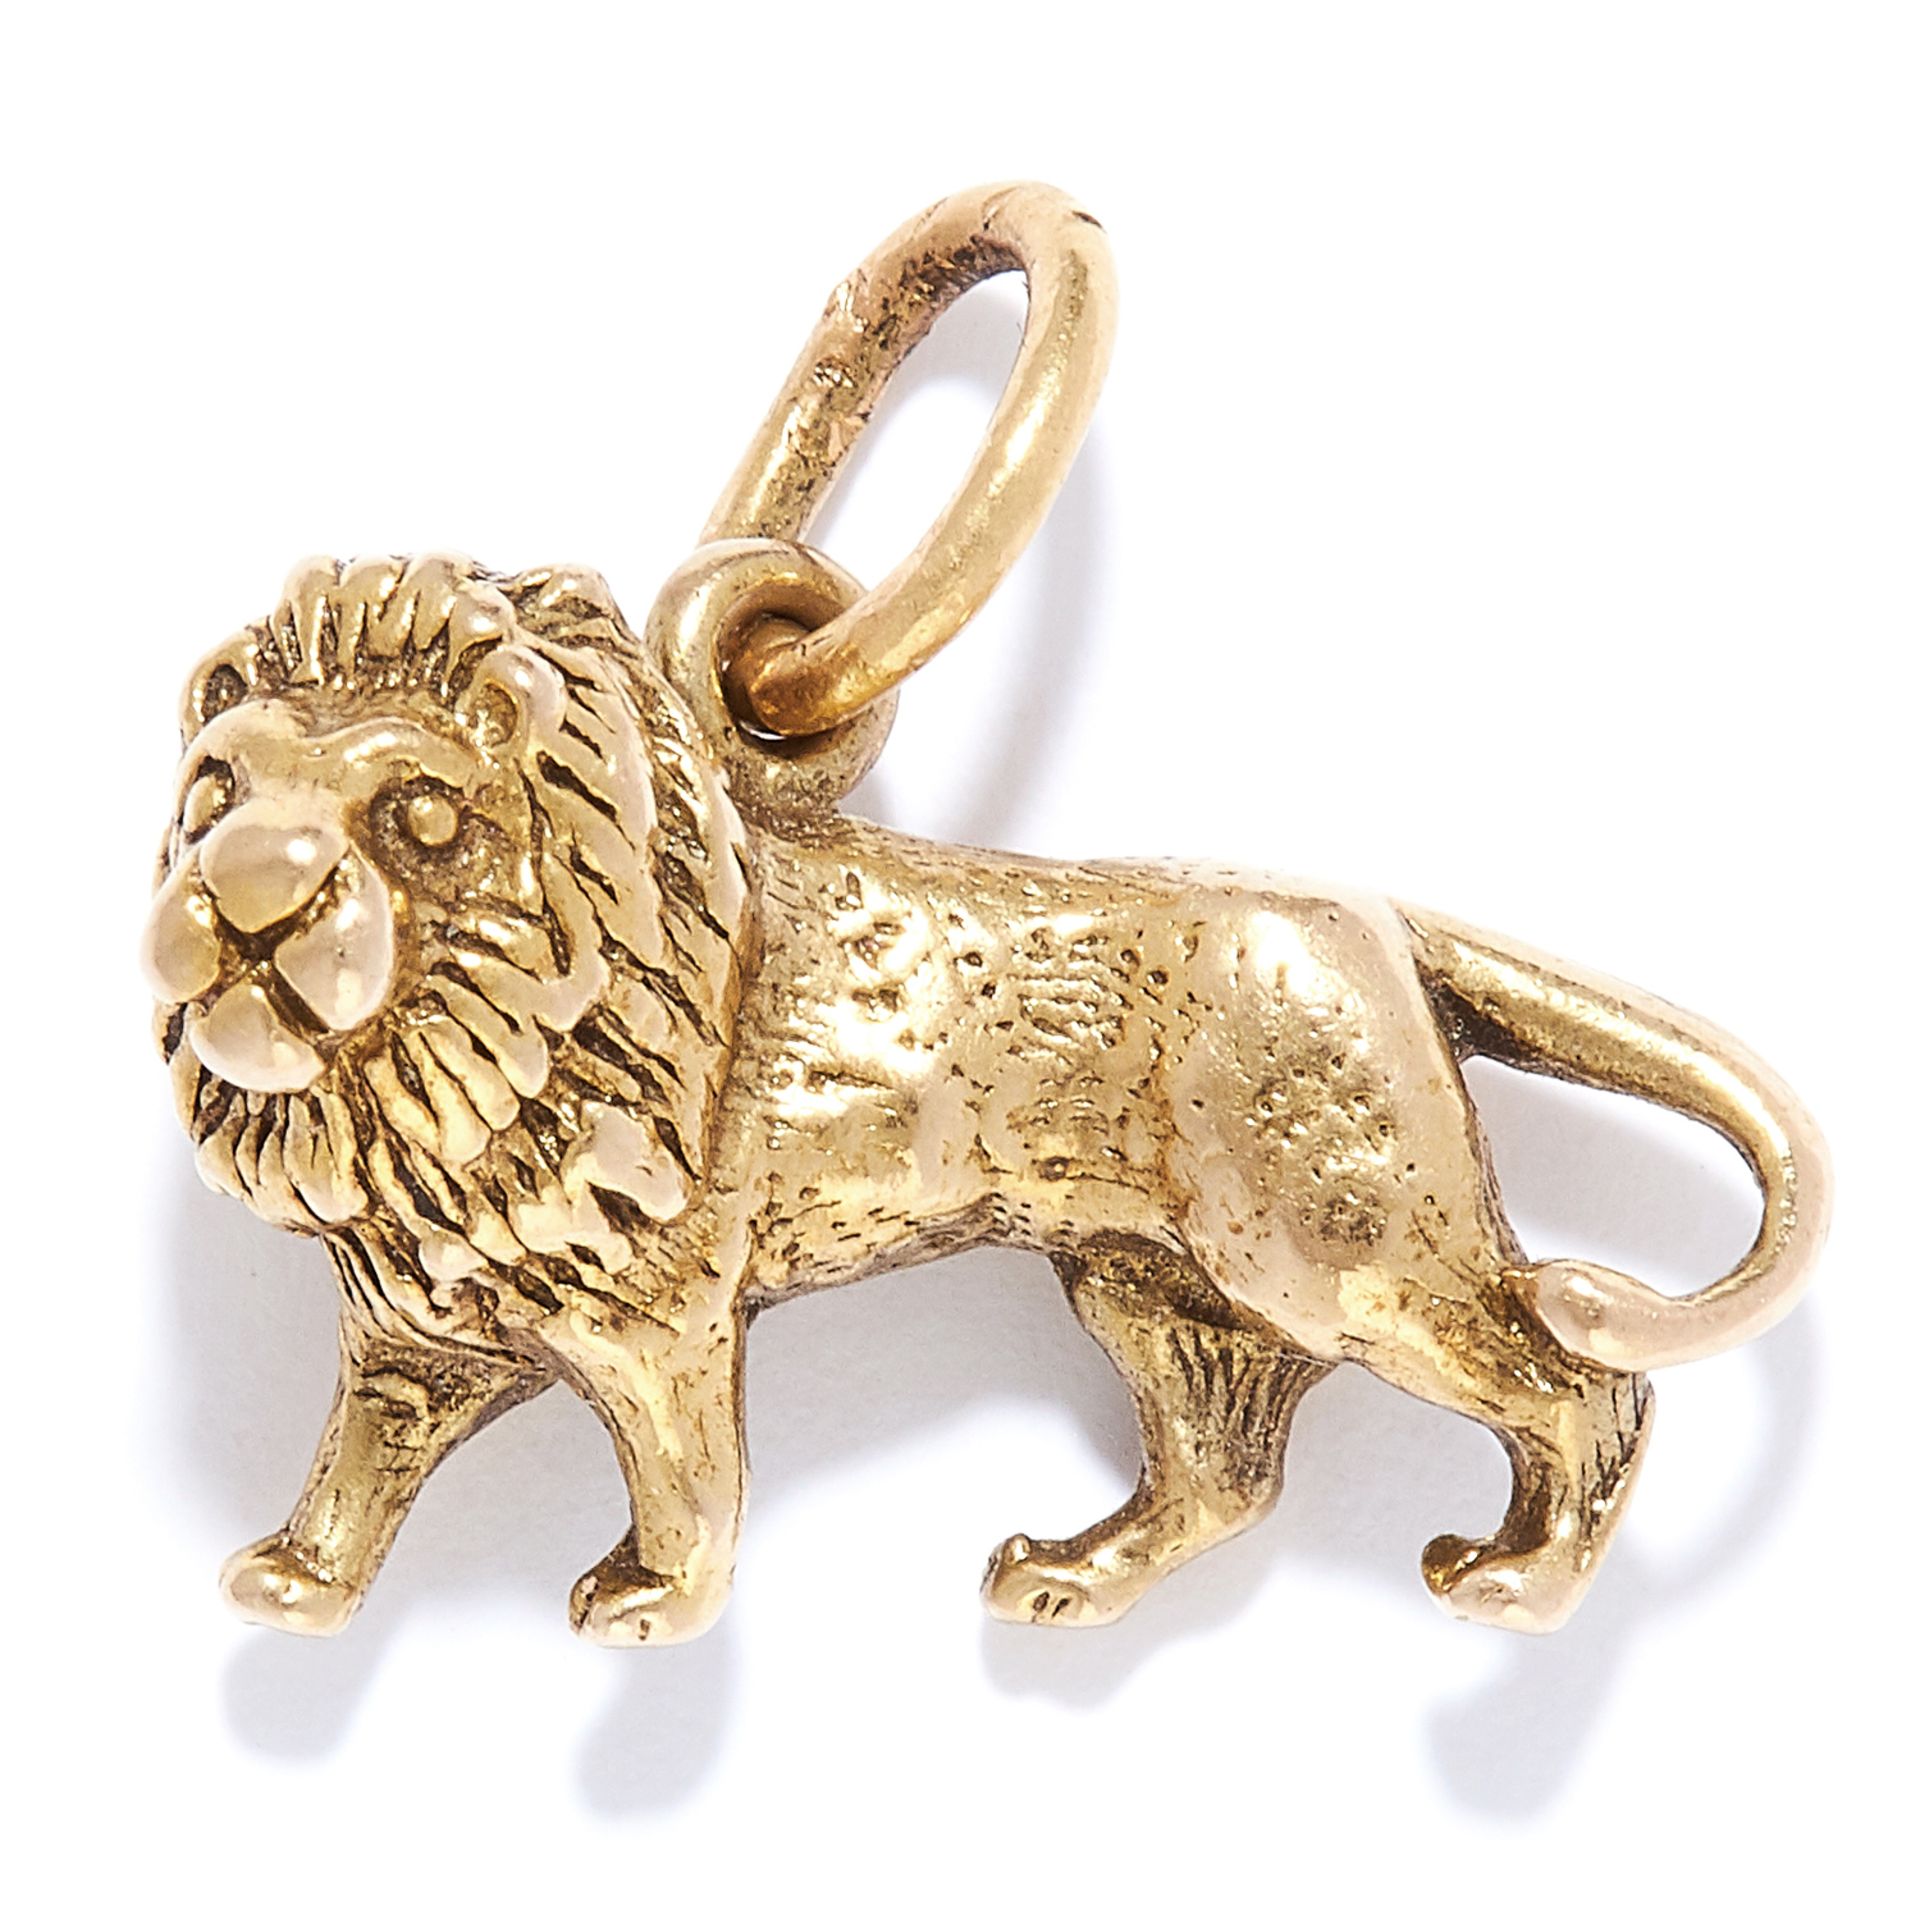 A LION CHARM / PENDANT in yellow gold, designed as a lion, British hallmarks, 1.8cm, 3.86g.